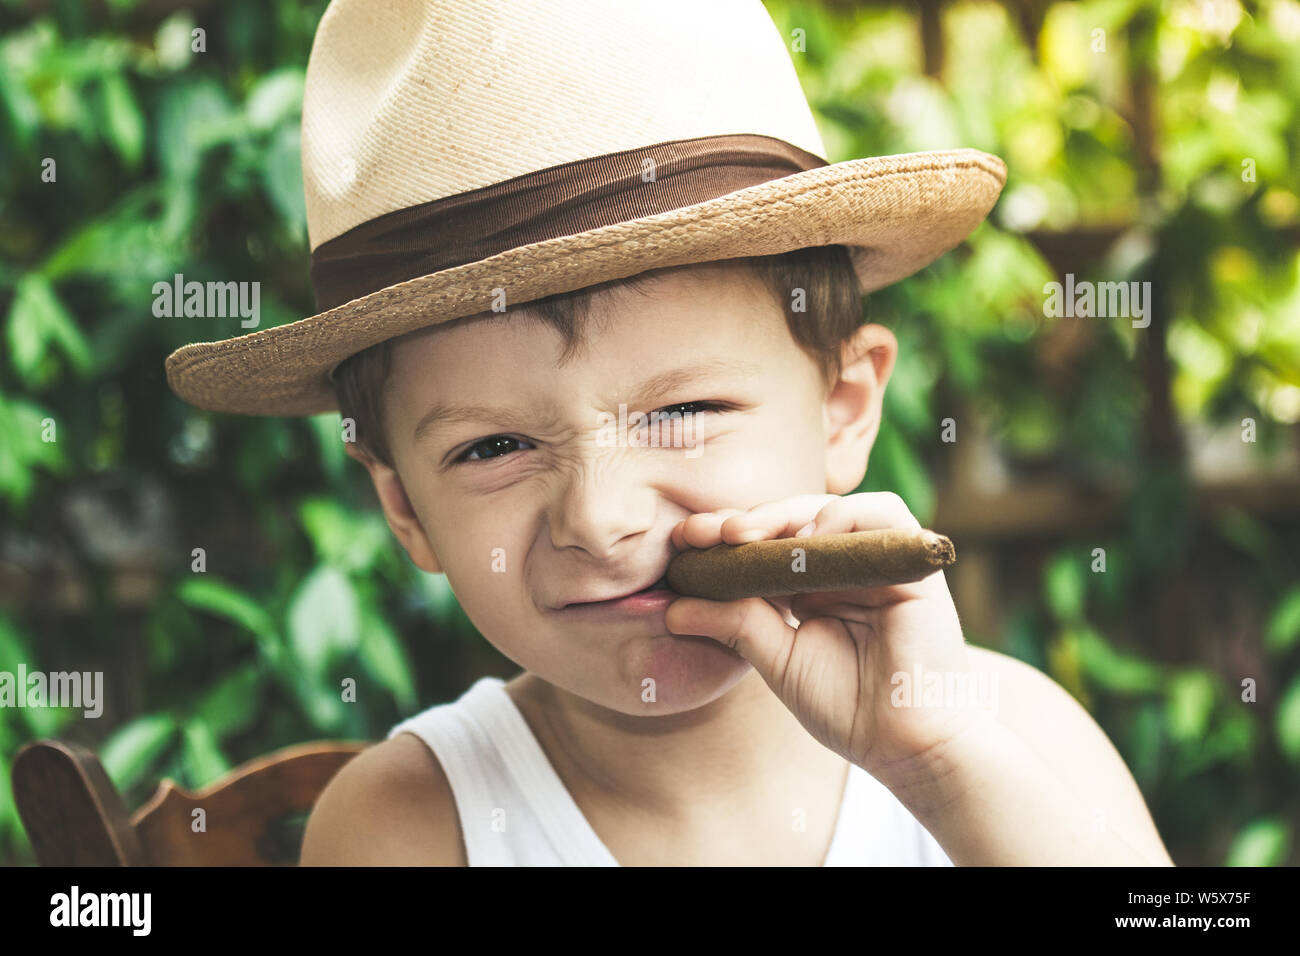 Beautiful young boy plays imitating an adult who smokes a cigar. Funny kid makes faces by wrinkling his nose while holding a cigar in his hand. Close Stock Photo